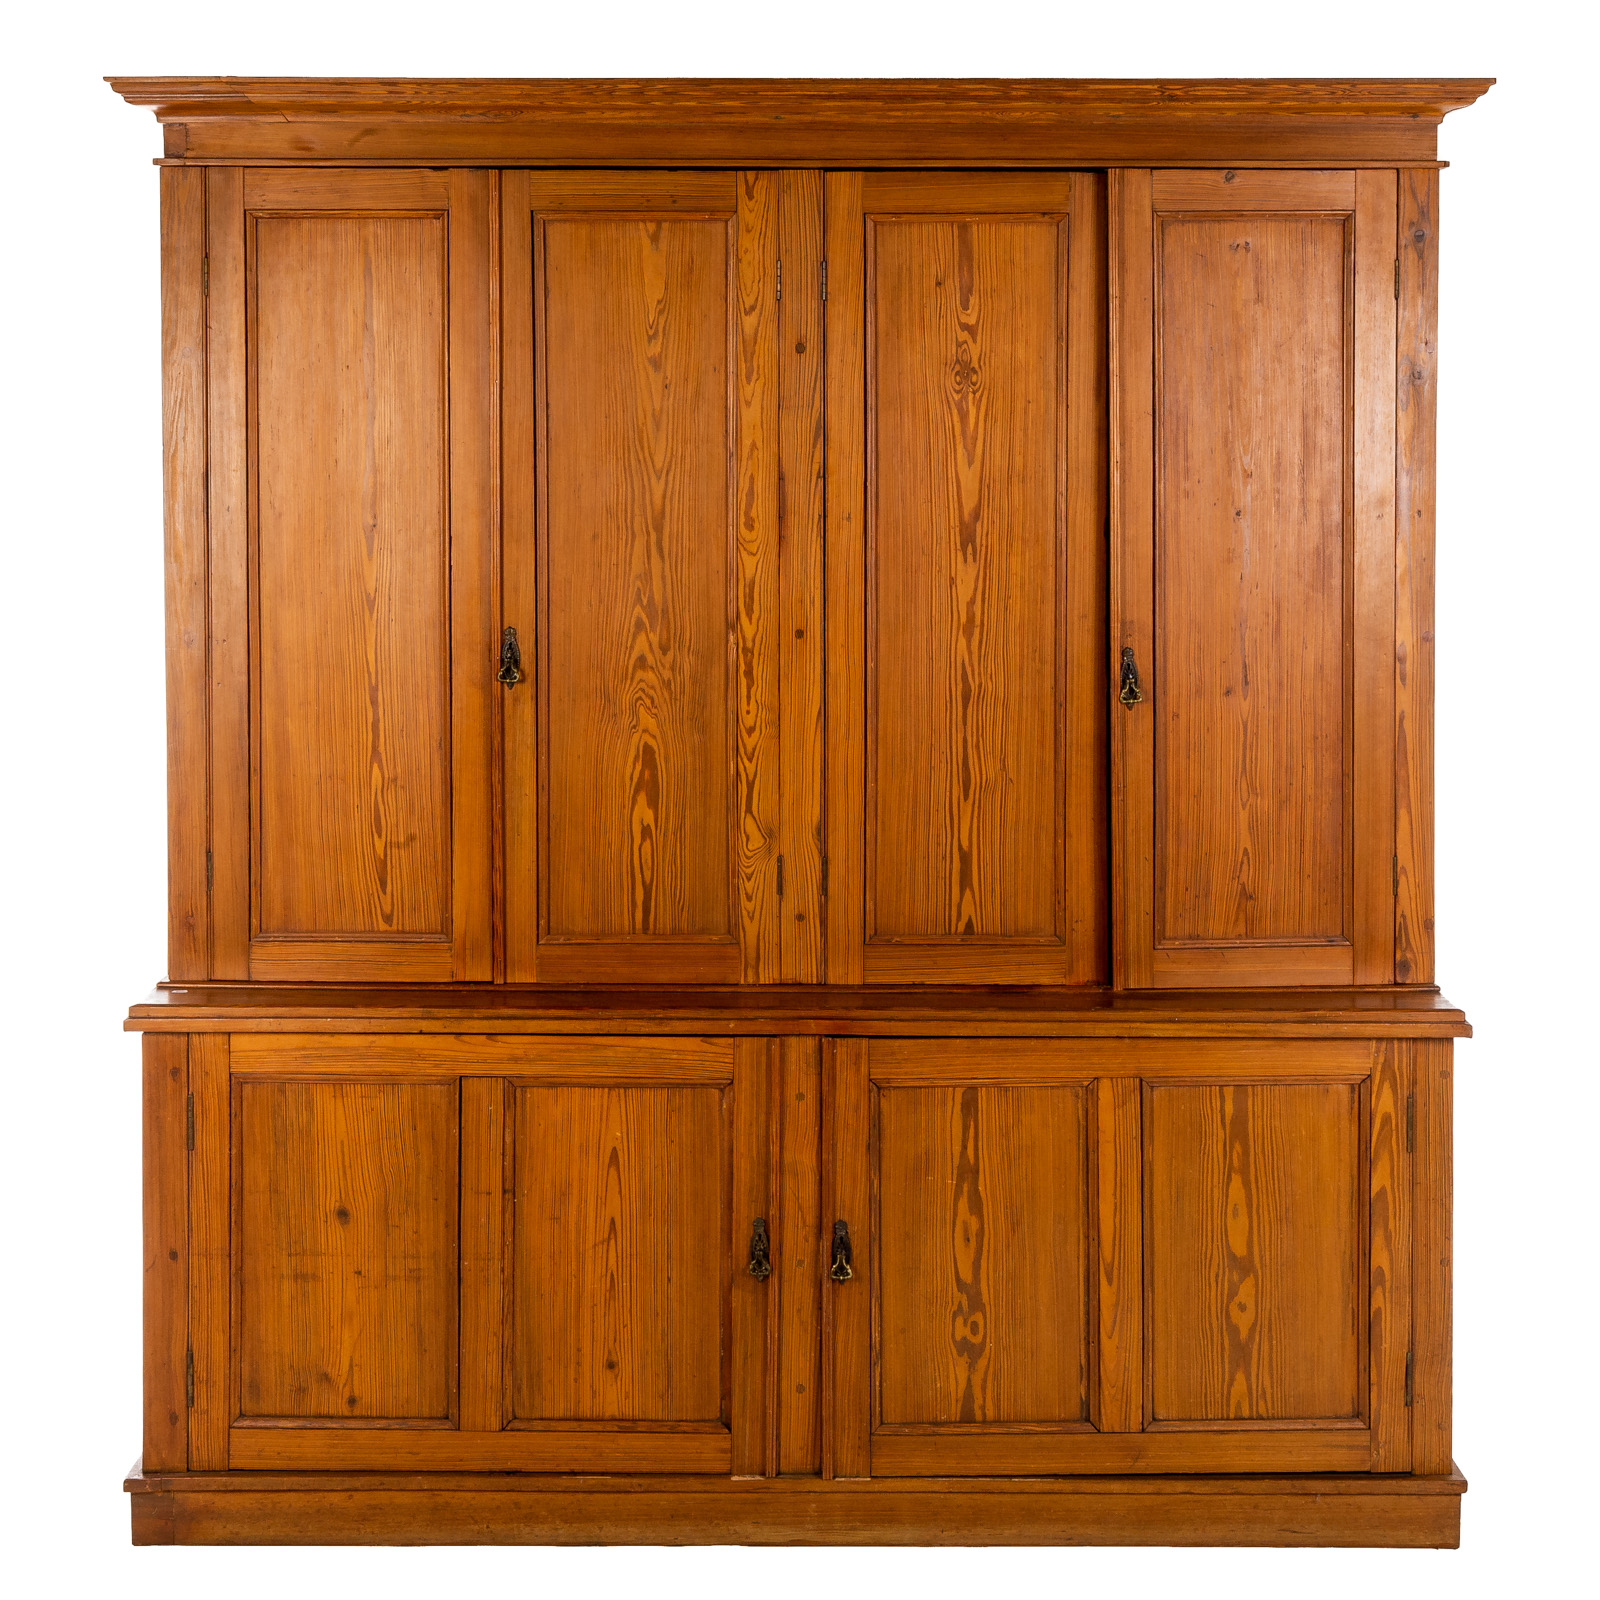 LARGE COUNTRY PINE STORE CUPBOARD 28759a